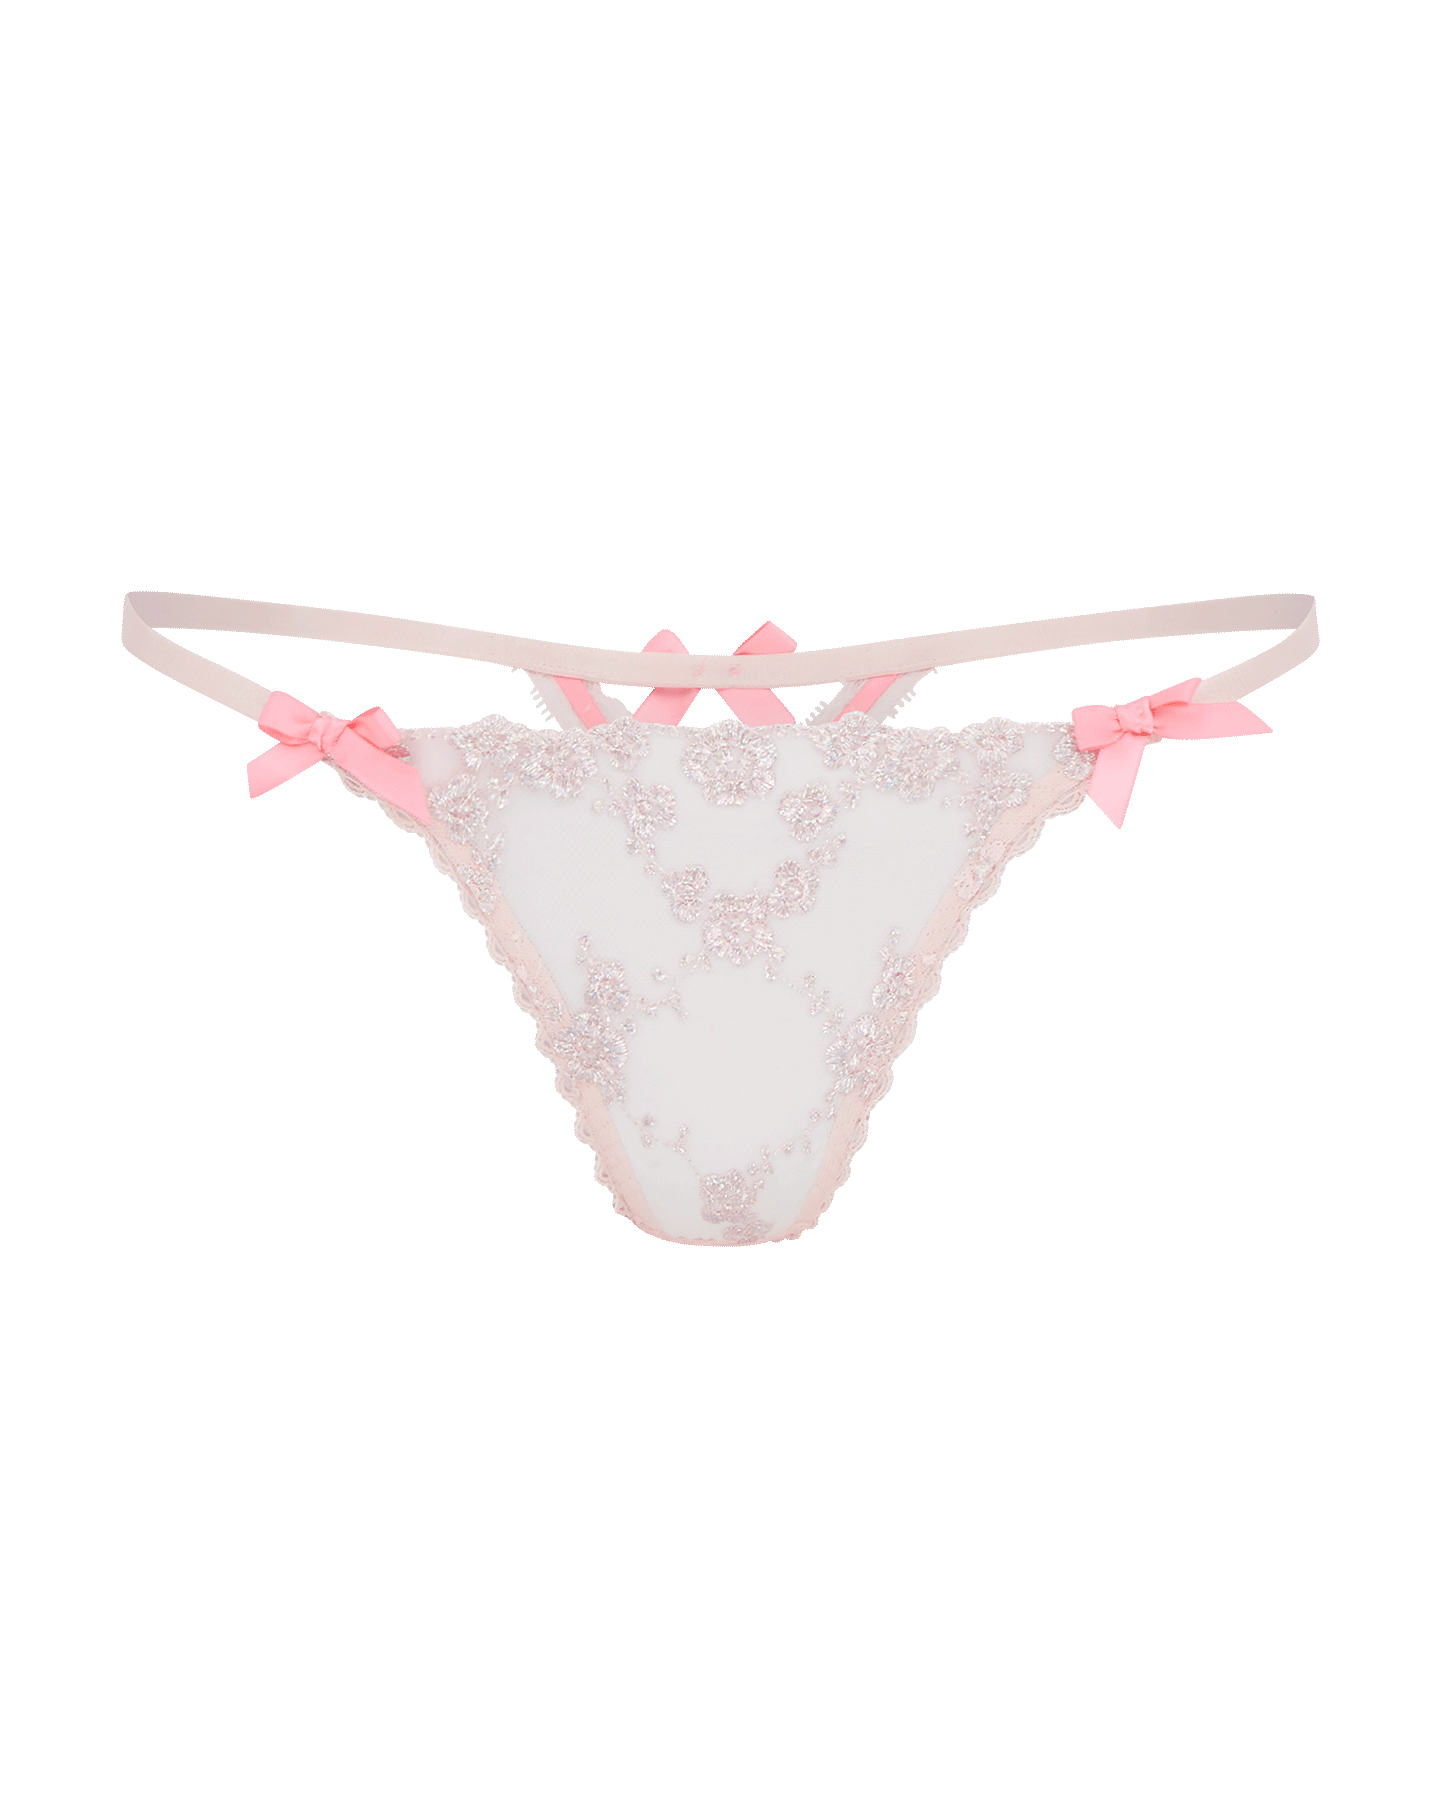 Ettie Thong in Pink  Agent Provocateur All Lingerie